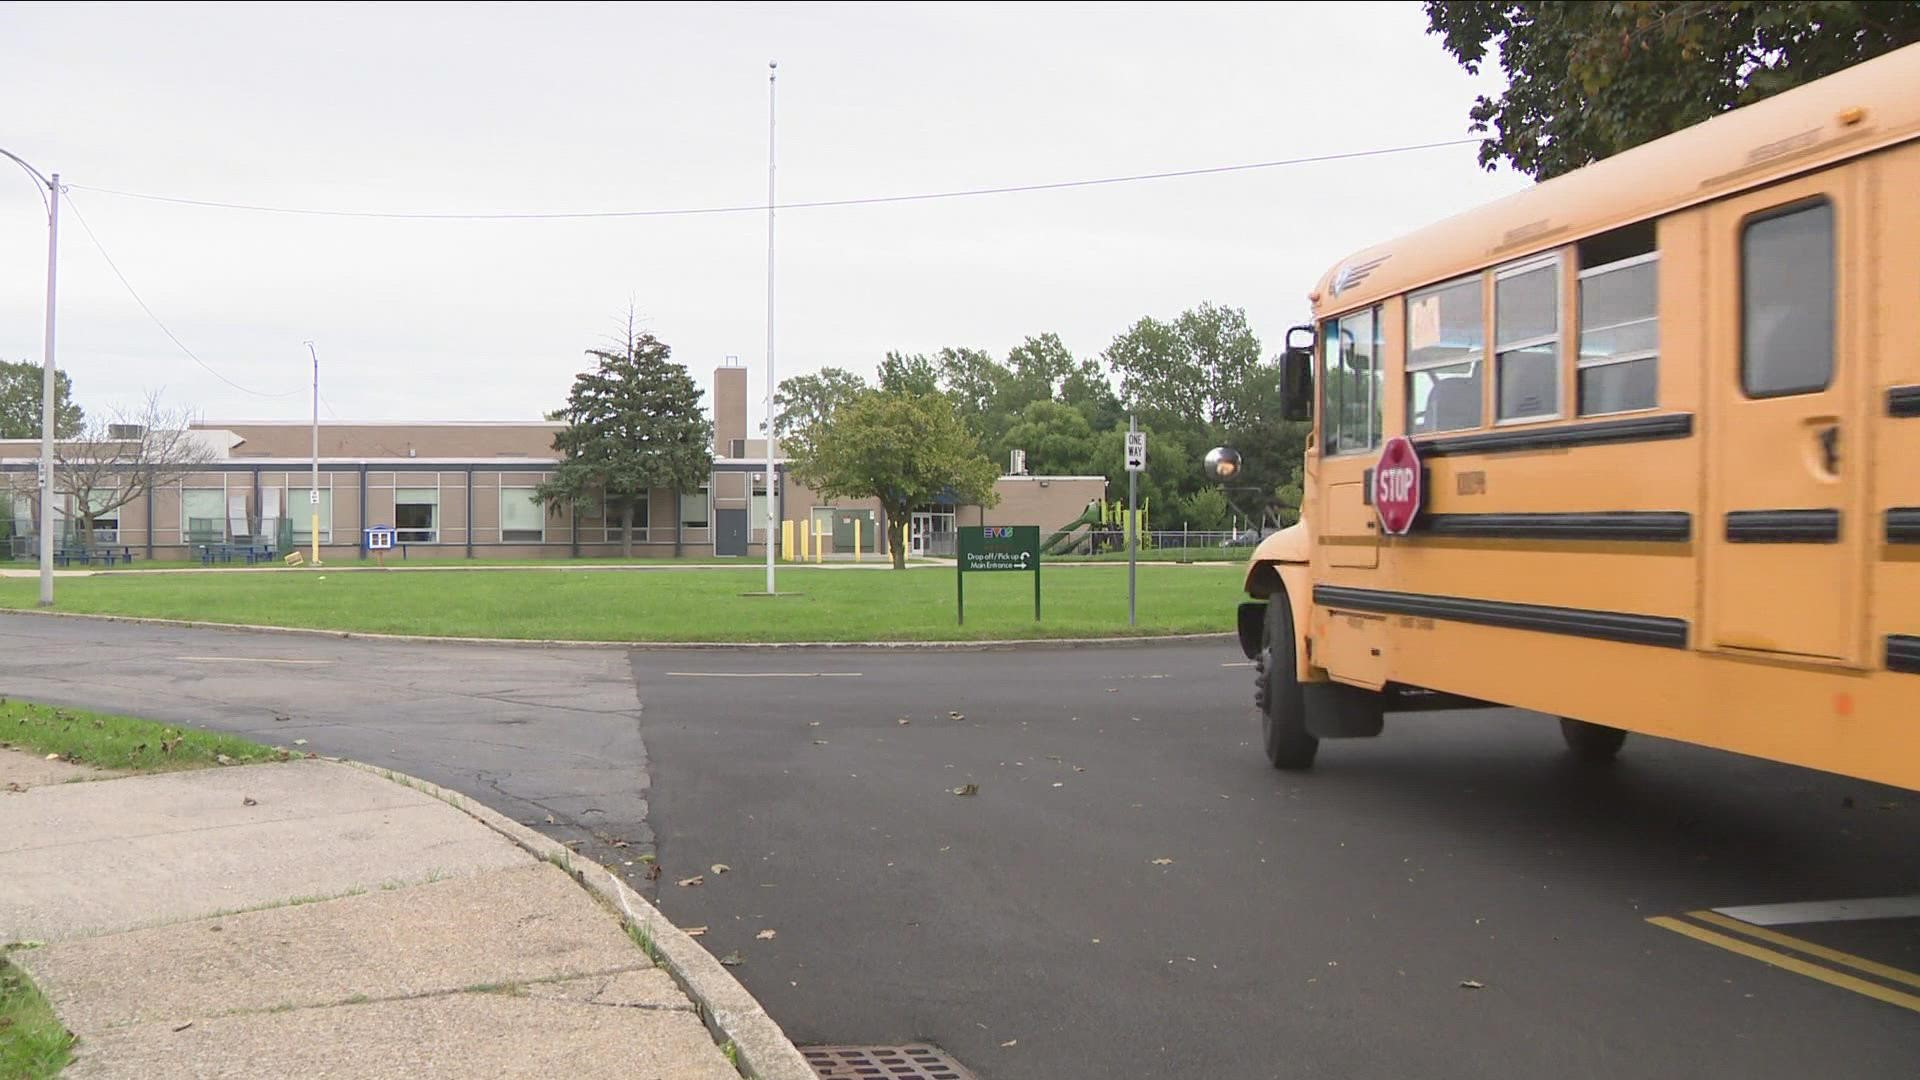 Now parents are even getting called to pick up their kids at some schools because the wait times for the next bus are so long.